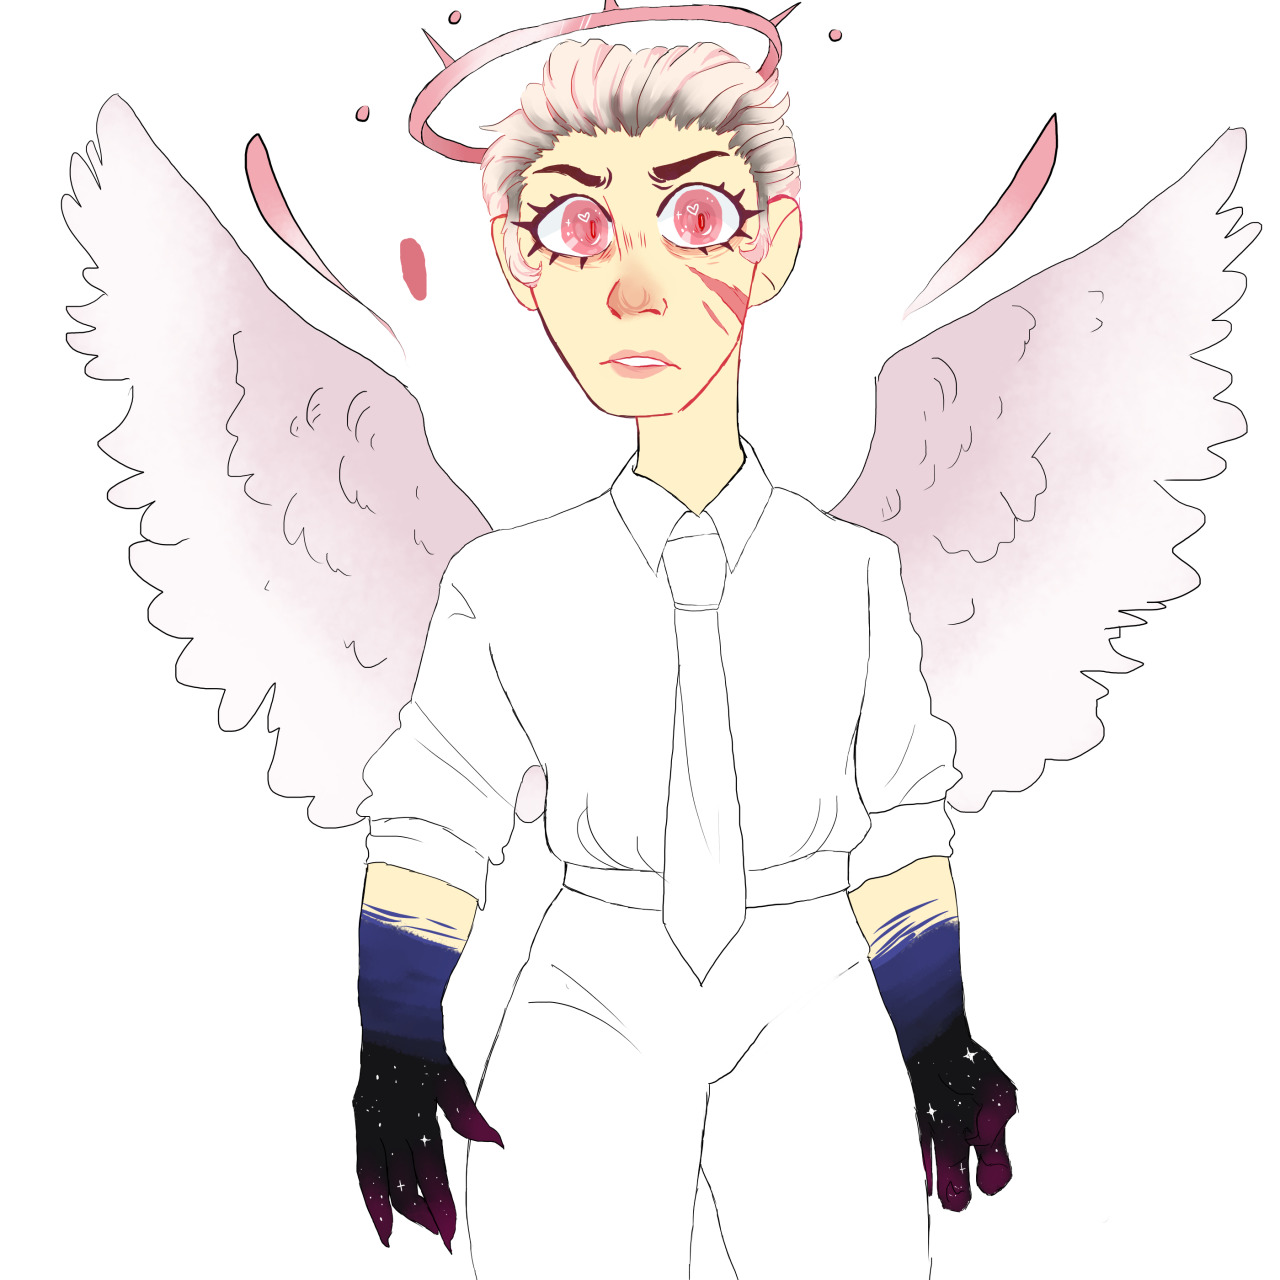 i reallllyy dont feel like finishing this lol anyways. jaeger! #my art tag #oc: jaeger#2022 #posting n doing a lot of art yay #angel oc#angelcore#boreastillae#pink aesthetic#pastel pink#firealpaca